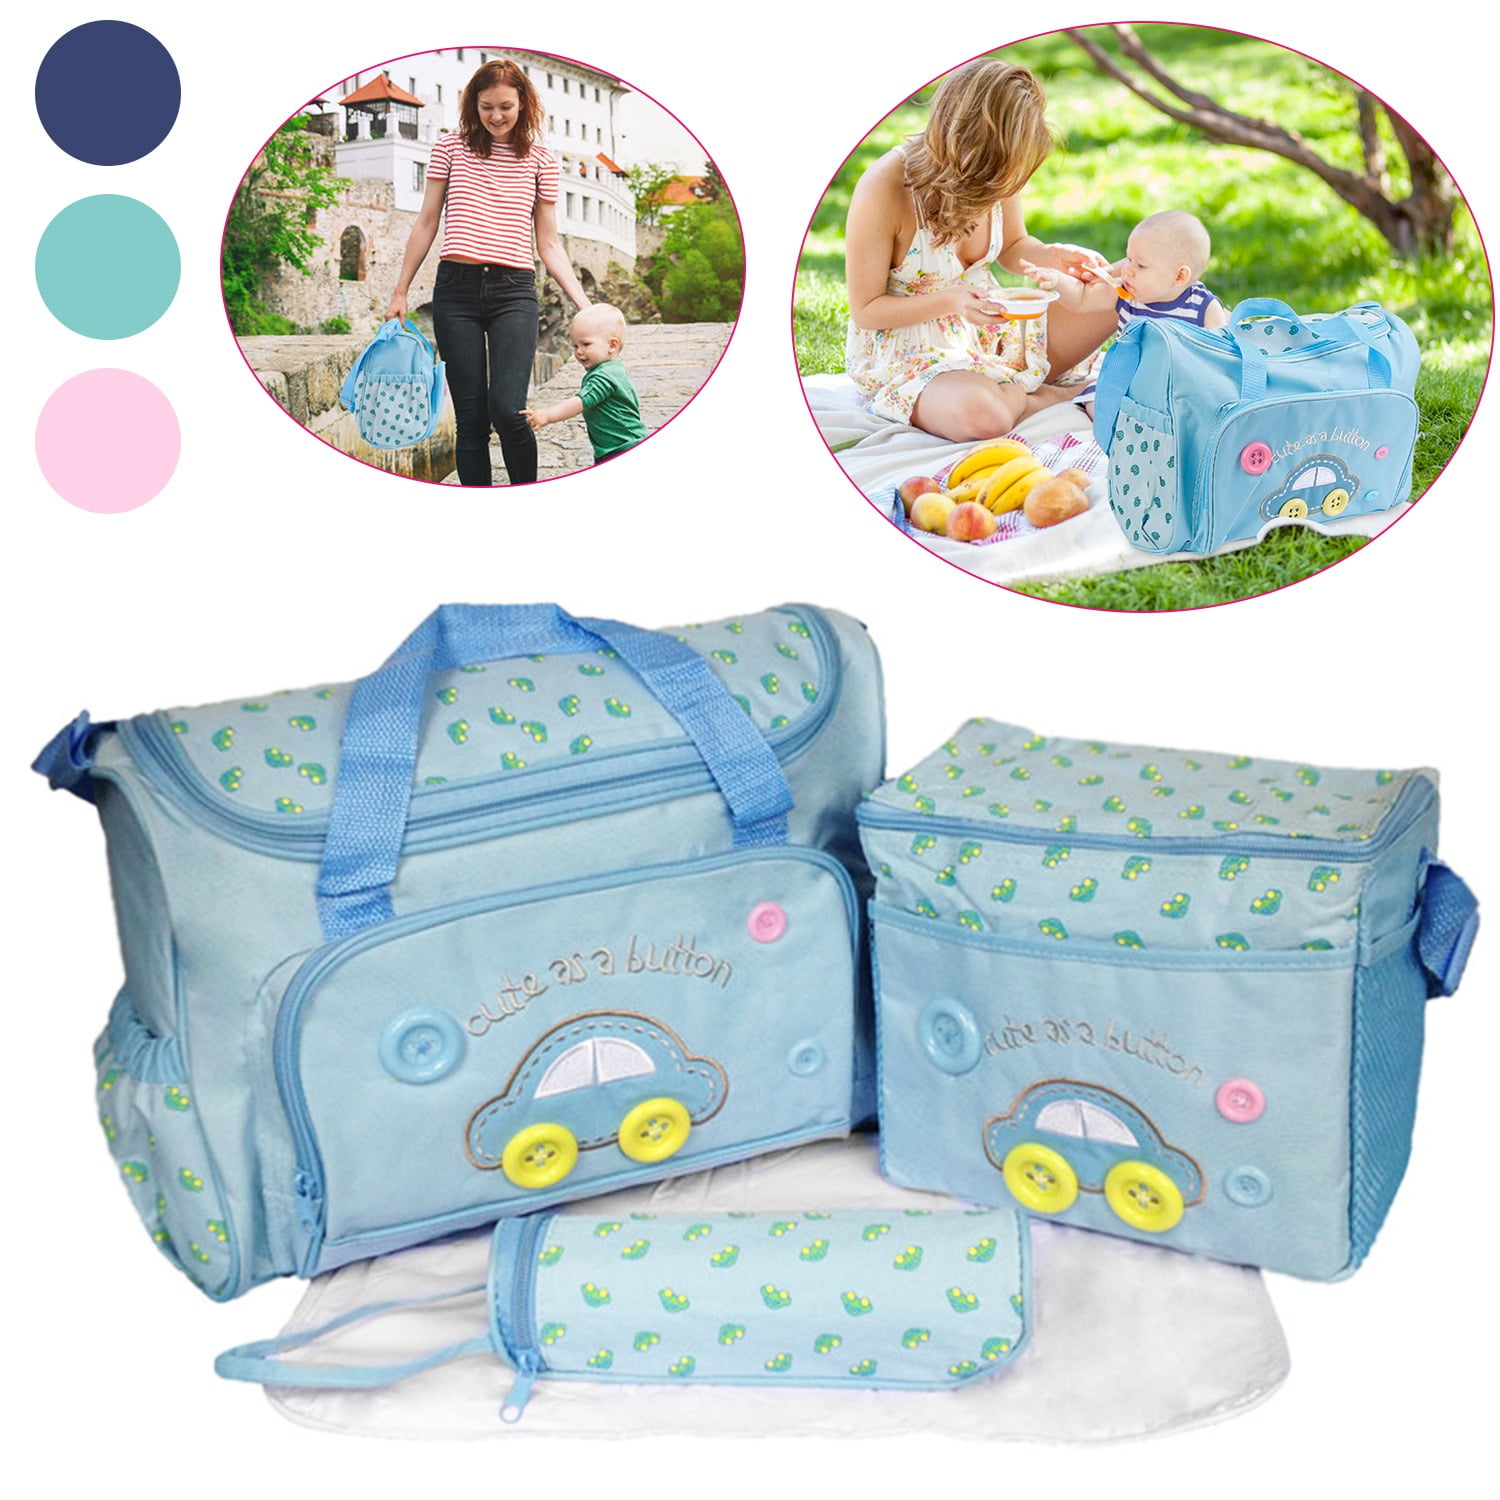 BabyLuv 4Pcs Diaper Bag Tote Set Baby Napping Changing Bag Shoulder Mummy  Bag with Diaper Changing Pad Light Blue 